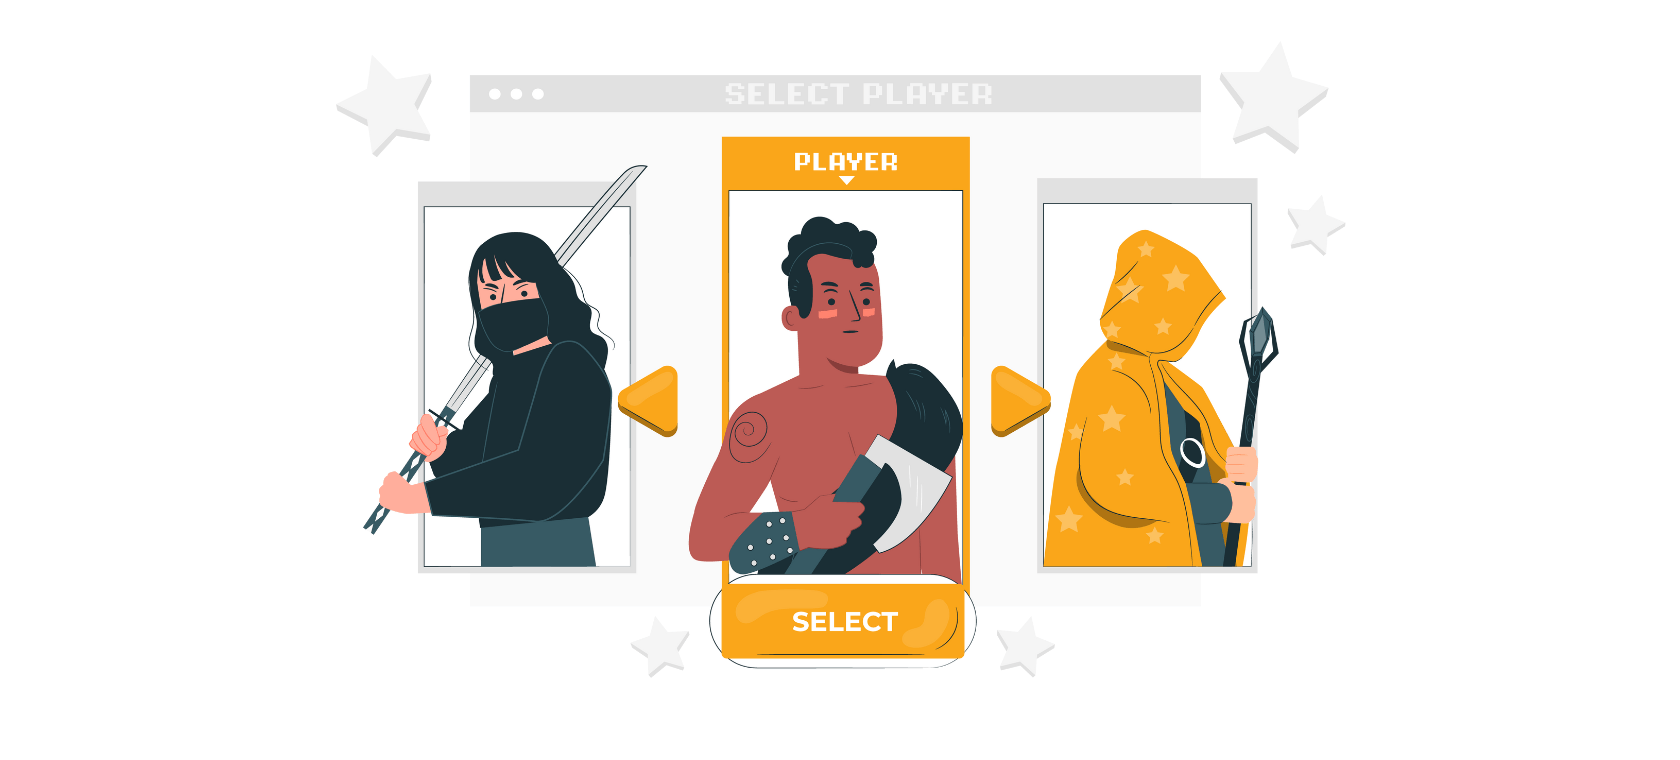 The illustration shows the selection of an avatar within a video game.